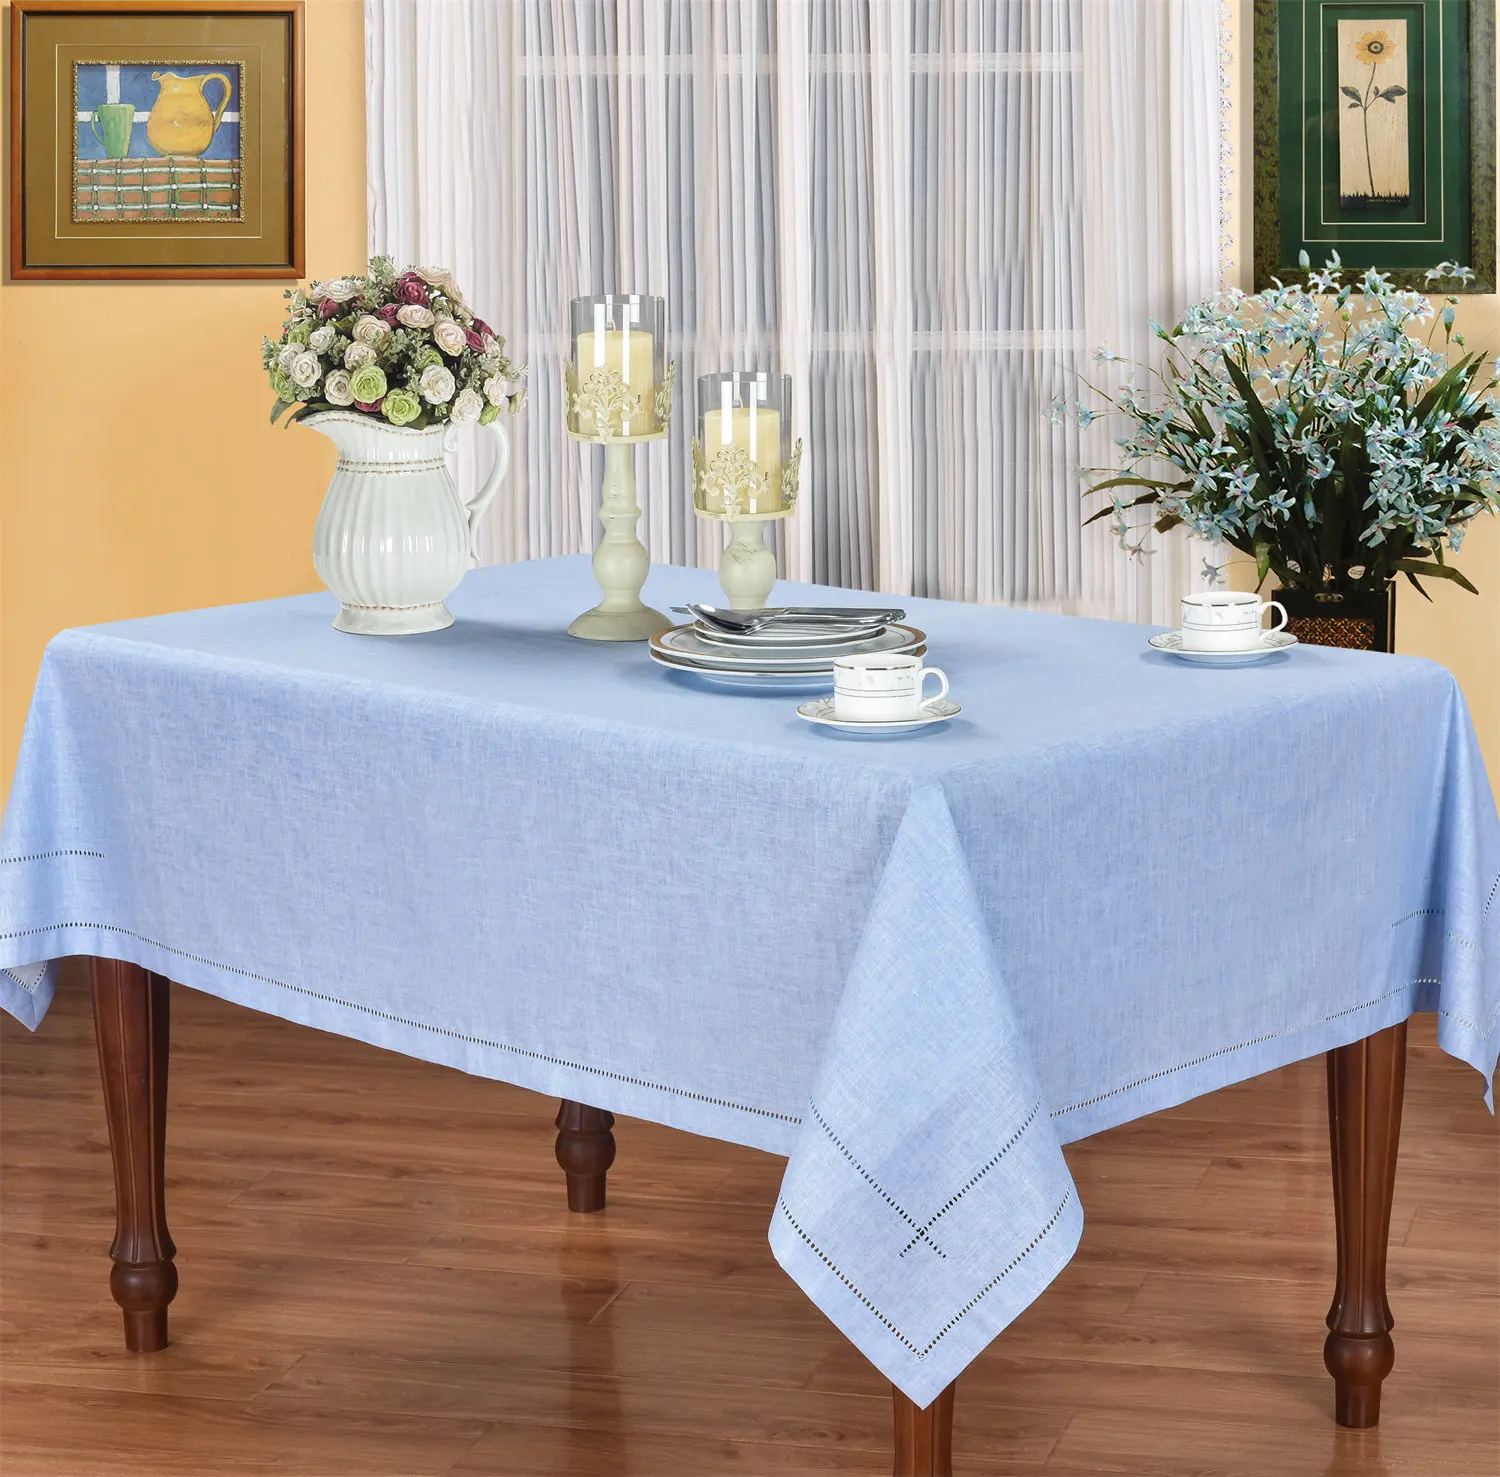 Camellia Casa GHF2015 Classic Hemstitch Linen +Viscone Simple Waterproof Tablecloth Grey Green Blue White Banquet/Hotel/airbnb